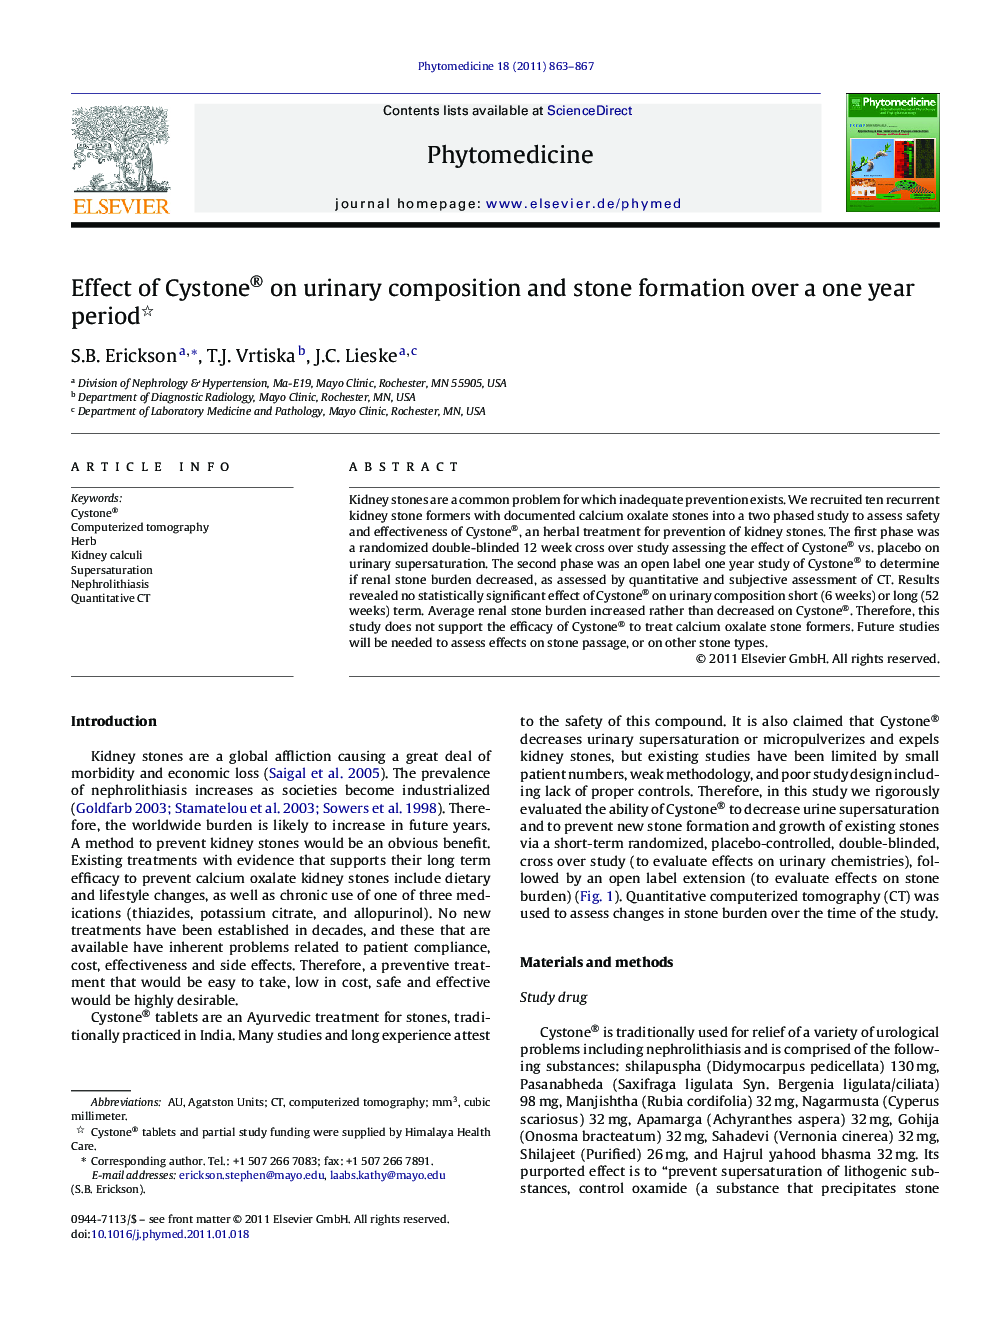 Effect of Cystone® on urinary composition and stone formation over a one year period